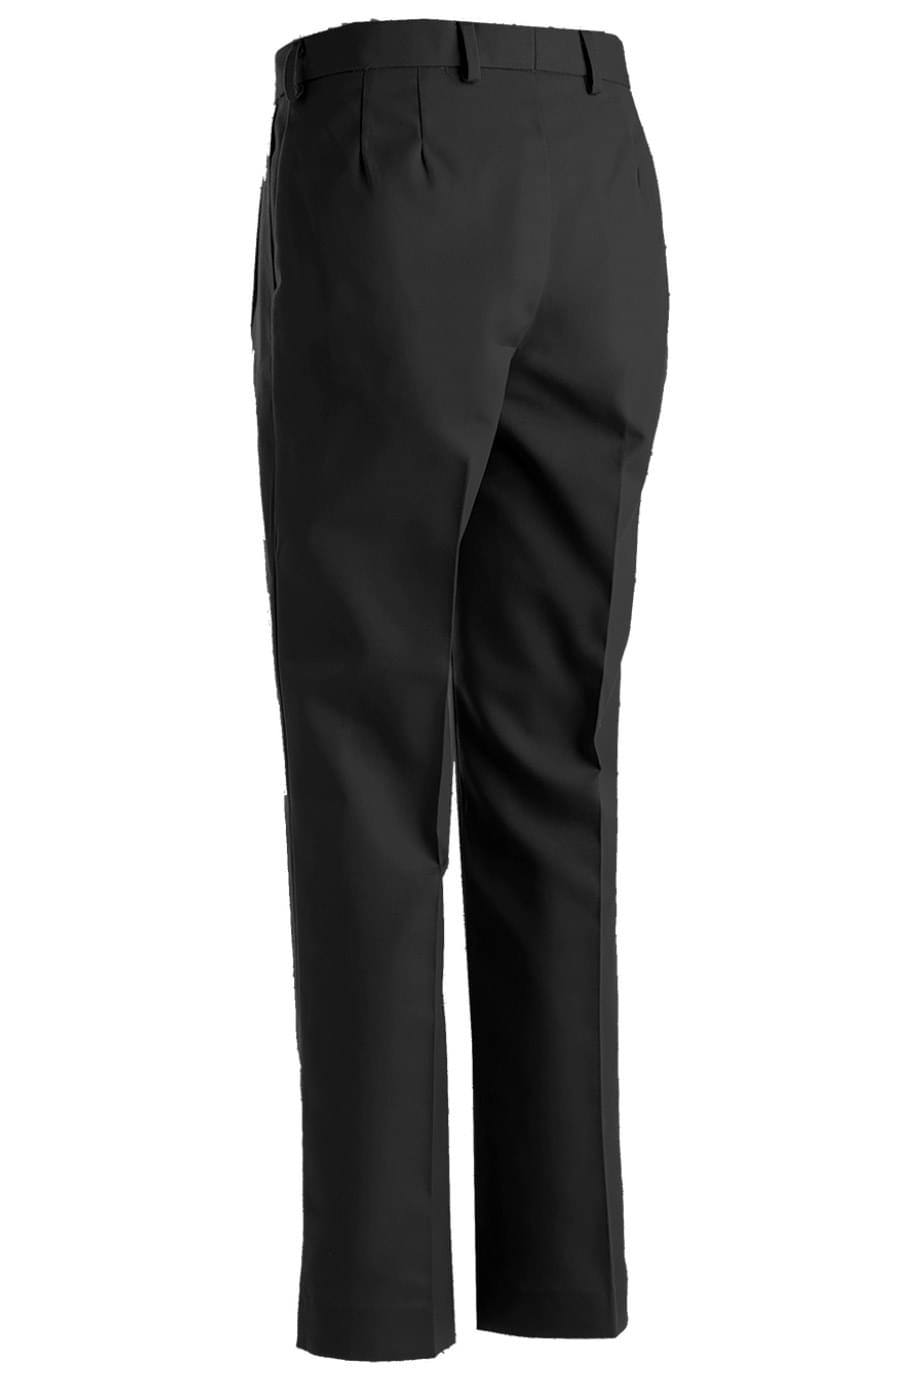 BUSINESS CHINO FLAT FRONT PANT